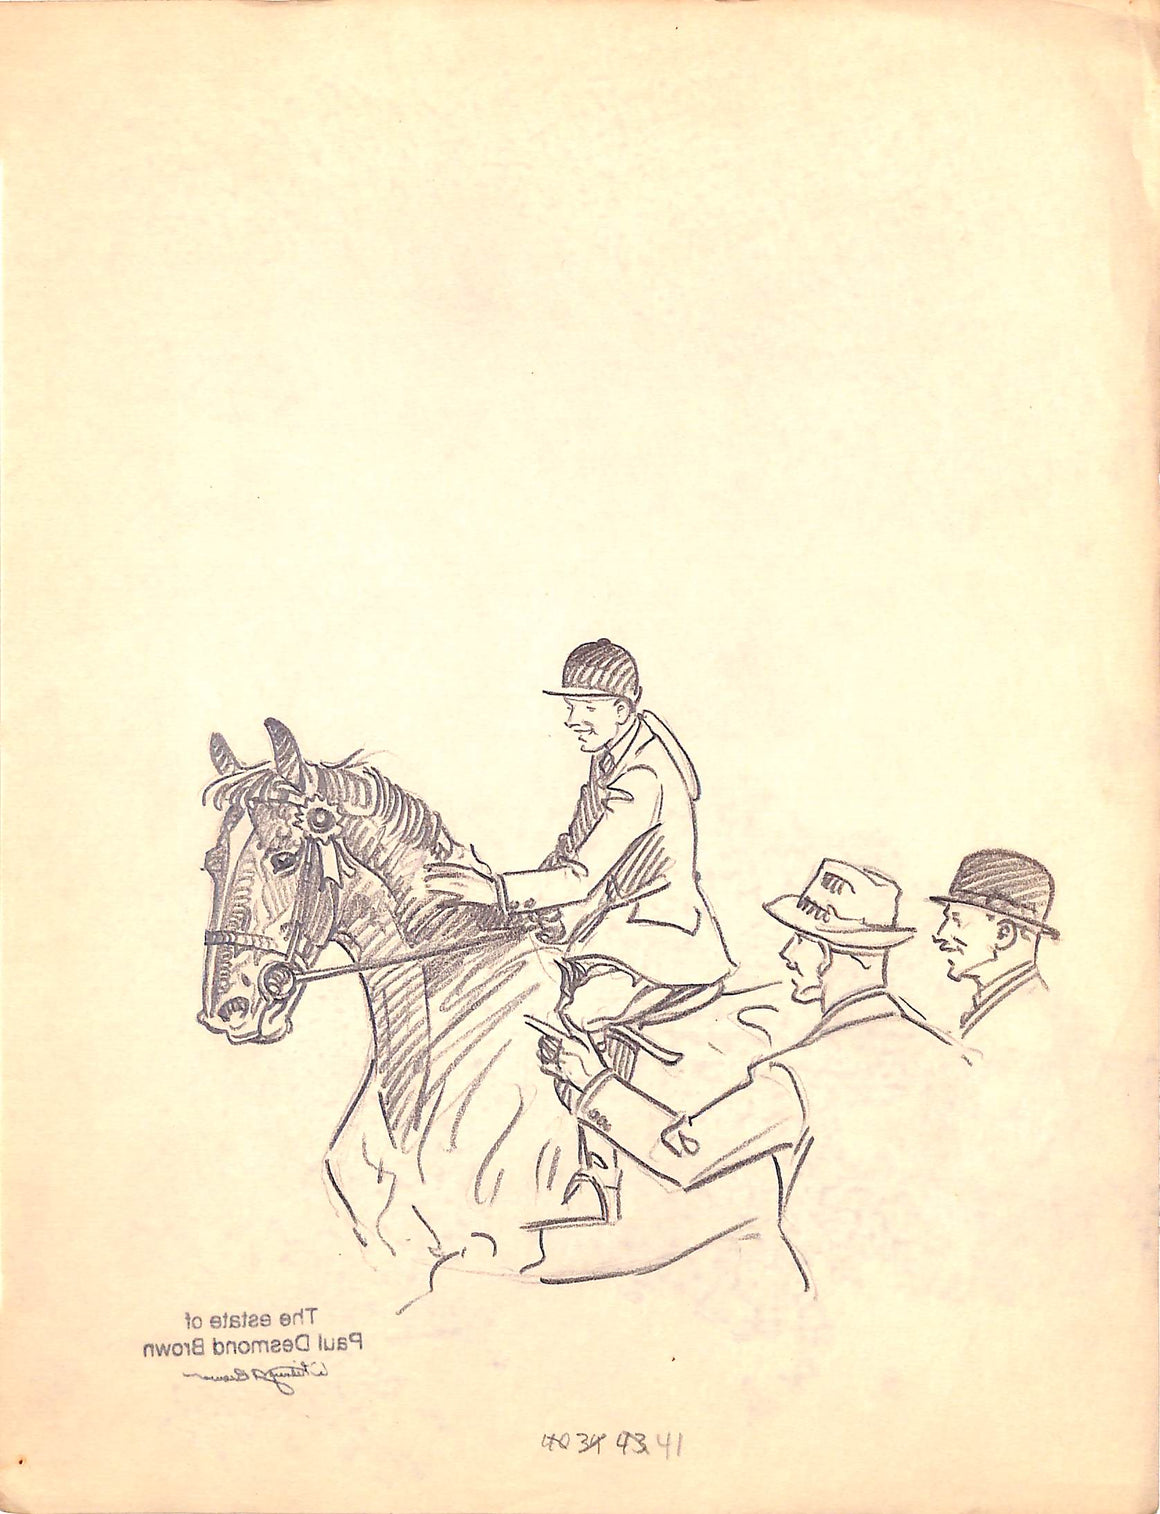 Original 1944 Pencil Drawing From Hi, Guy! The Cinderella Horse By Paul Brown 29